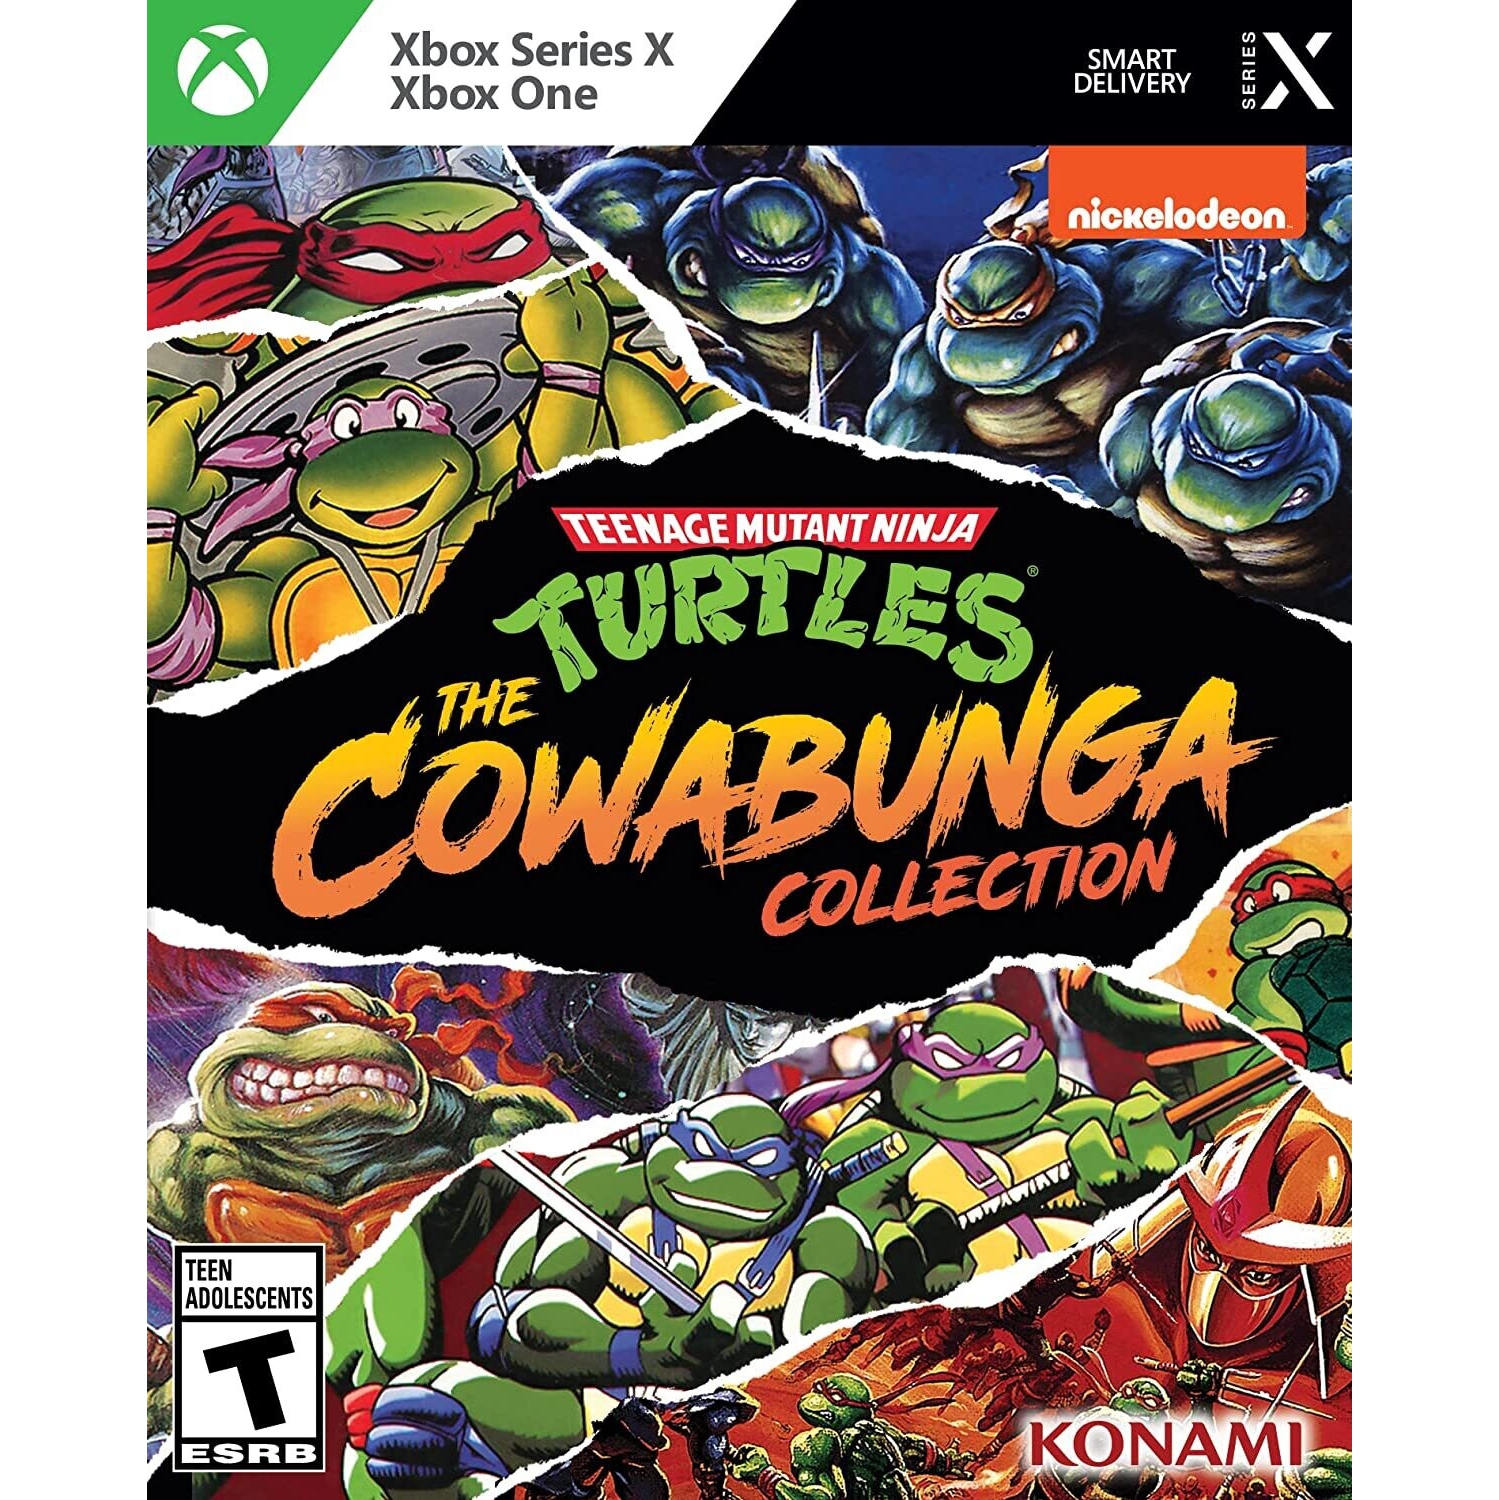 Teenage Mutant Ninja Turtles: The Cowabunga Collection Limited Edition for Xbox One & Xbox Series X [VIDEOGAMES]